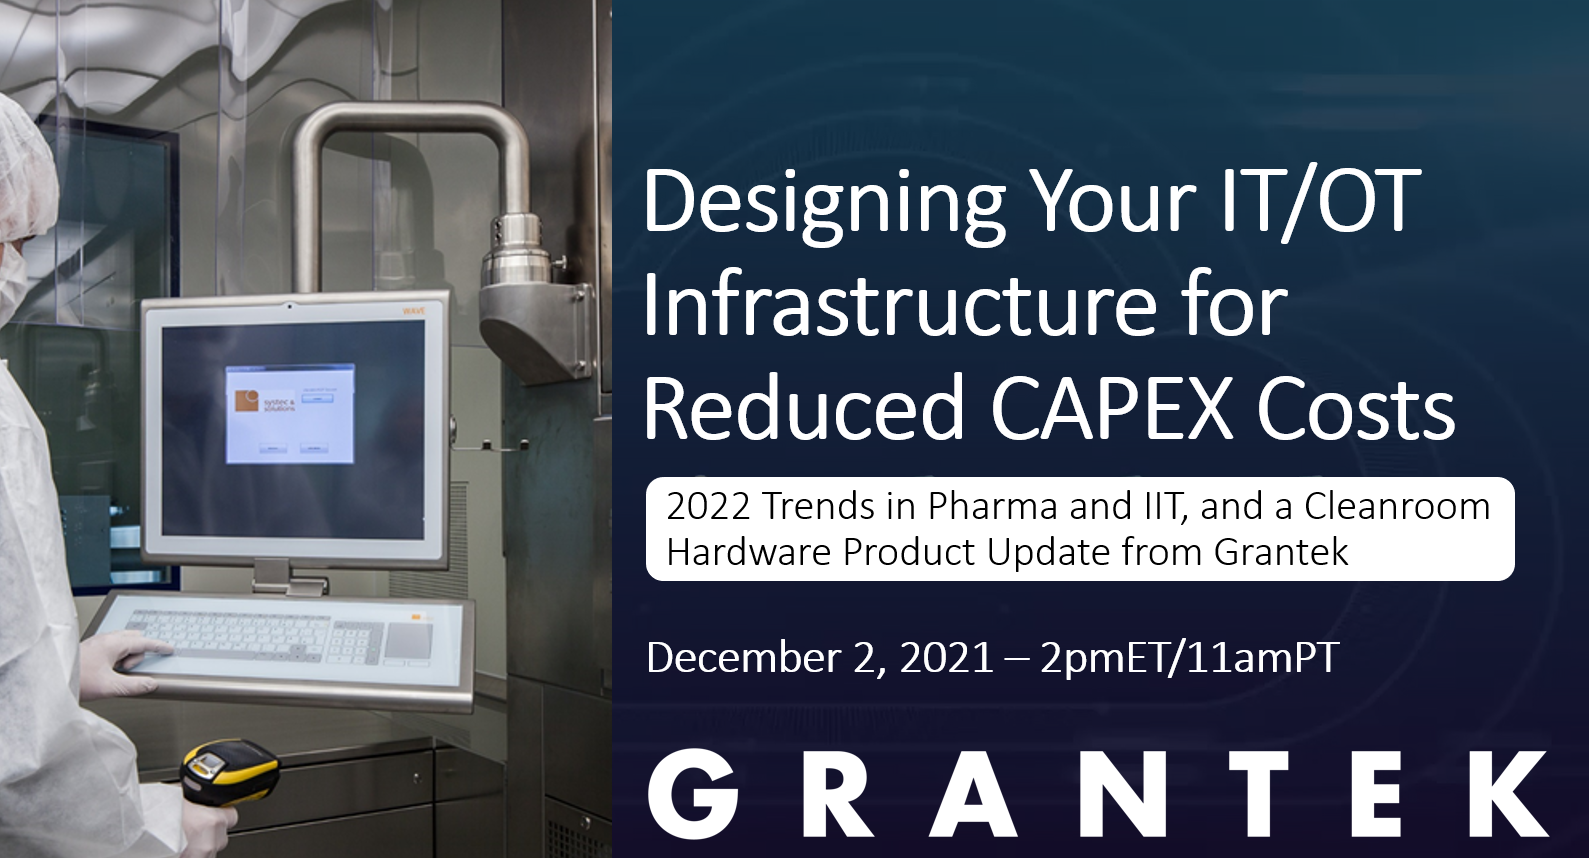 Designing Your IT/OT Infrastructure for Reduced CAPEX Costs: 2022 Trends in Pharma and IIT, and a Cleanroom Hardware Product Update from Grantek | December 2, 2021 – 2pmET/11amPT